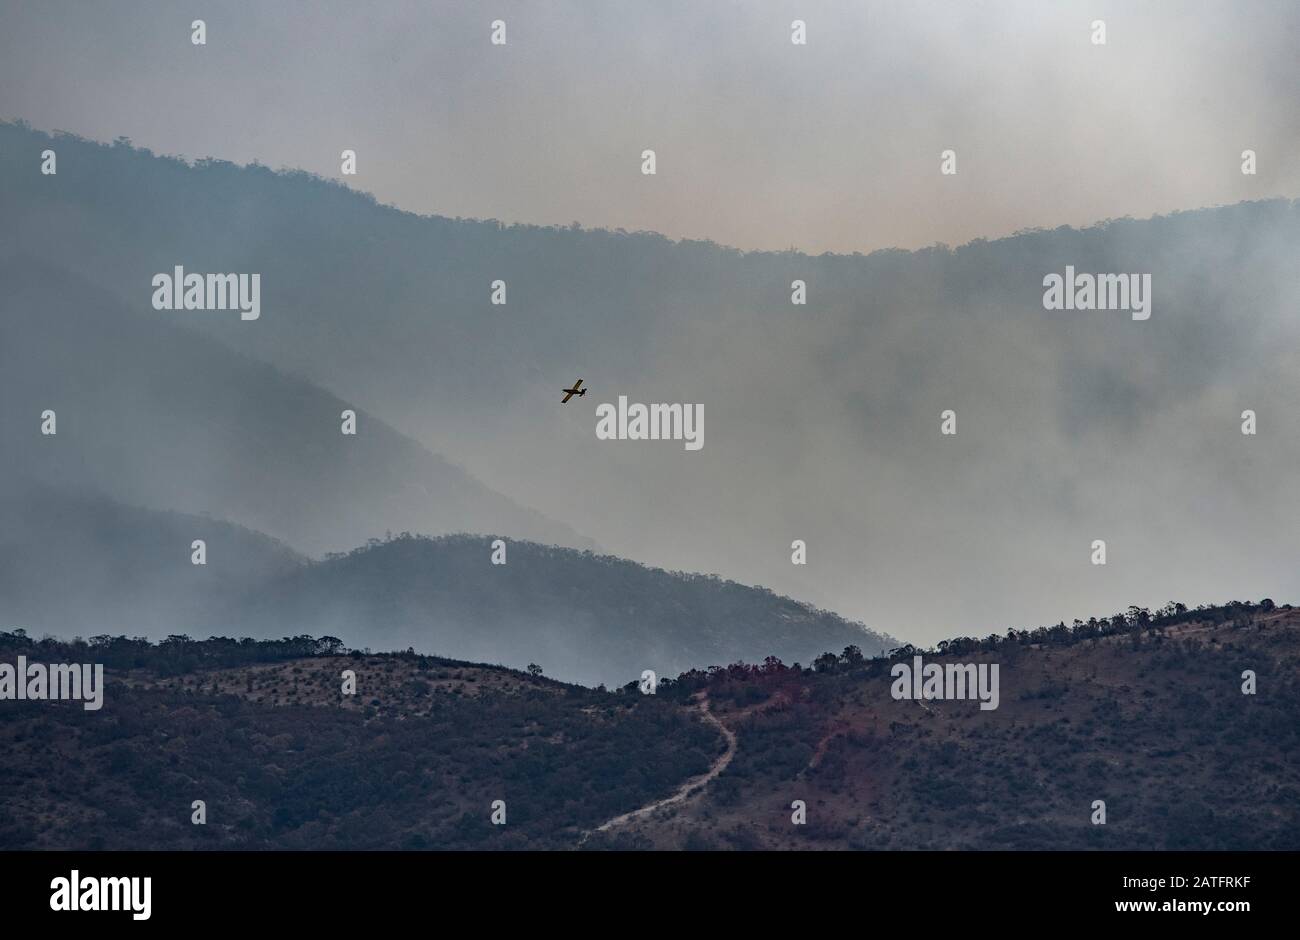 Orroral Valley Bushfire, Canberra, Australia, 02 Feb. 2020. Image taken of fire retardant operations in the hills near Banks, Canberra, Australia. The fire is threatening the southern suburbs of Canberra, ACT and the retardant drop is to try to control the blaze from reaching populated areas. Credit: FoxTree gfx/Alamy Live News Stock Photo